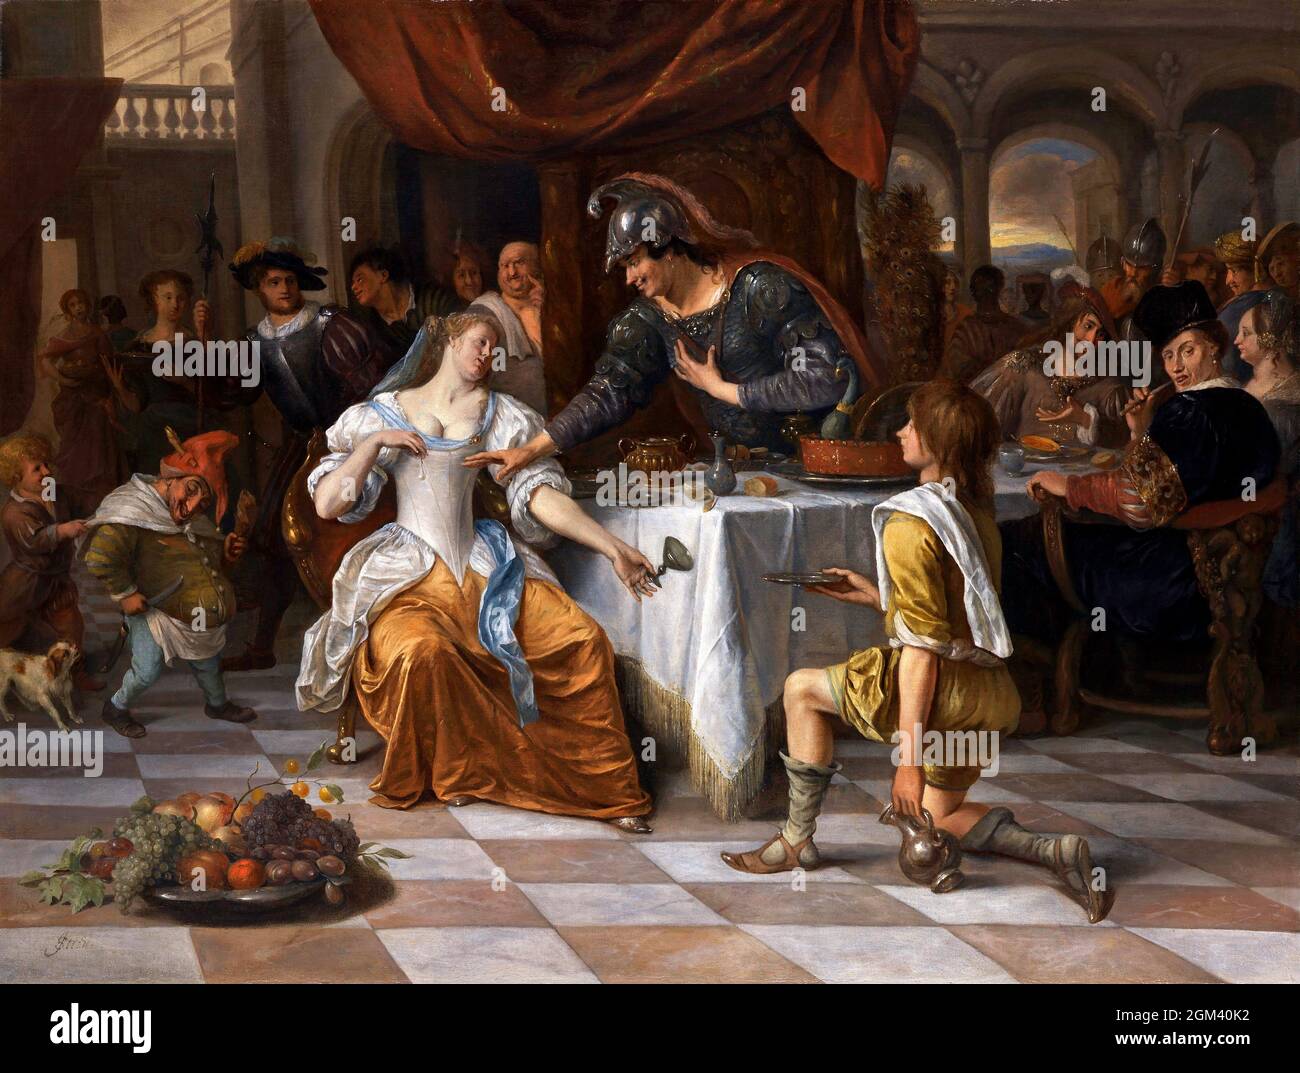 Jan Steen. 'Banquet of Anthony and Cleopatra' by the Dutch Golden Age artist, Jan Havickszoon Steen (c. 1626-1679), oil on canvas, c. 1673-75 Stock Photo